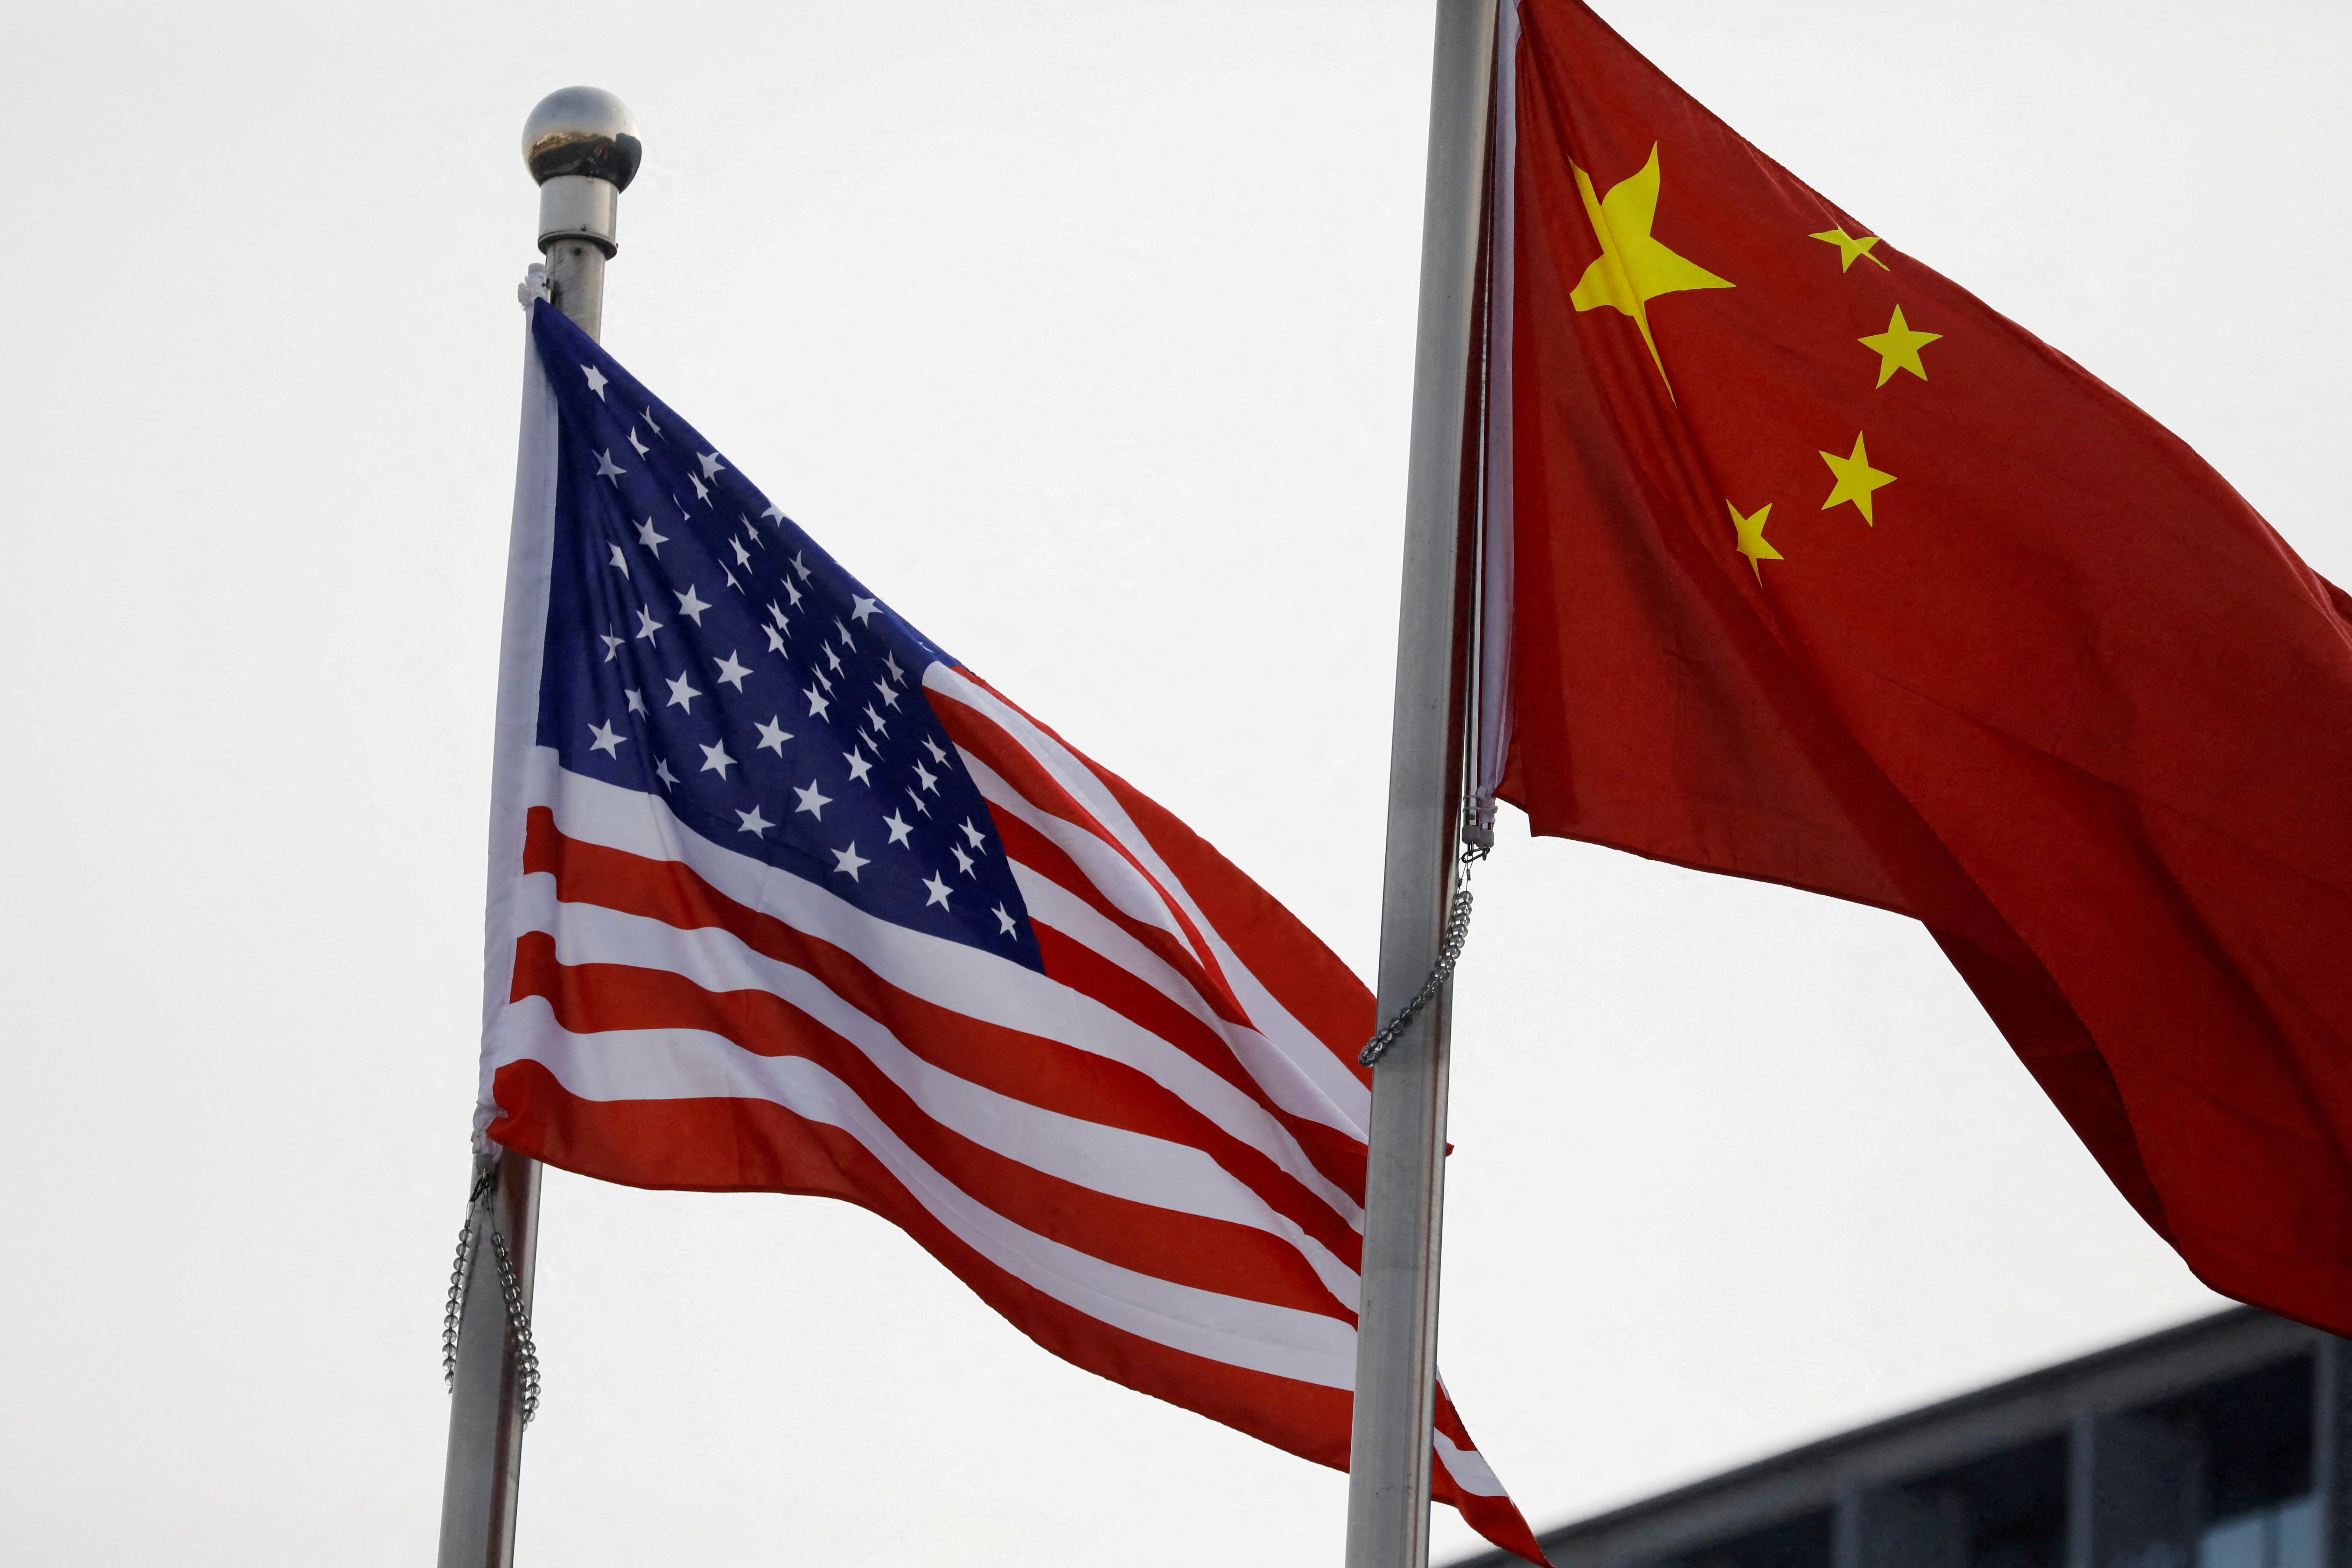 Chinese and U.S. flags flutter outside the building of an American company in Beijing